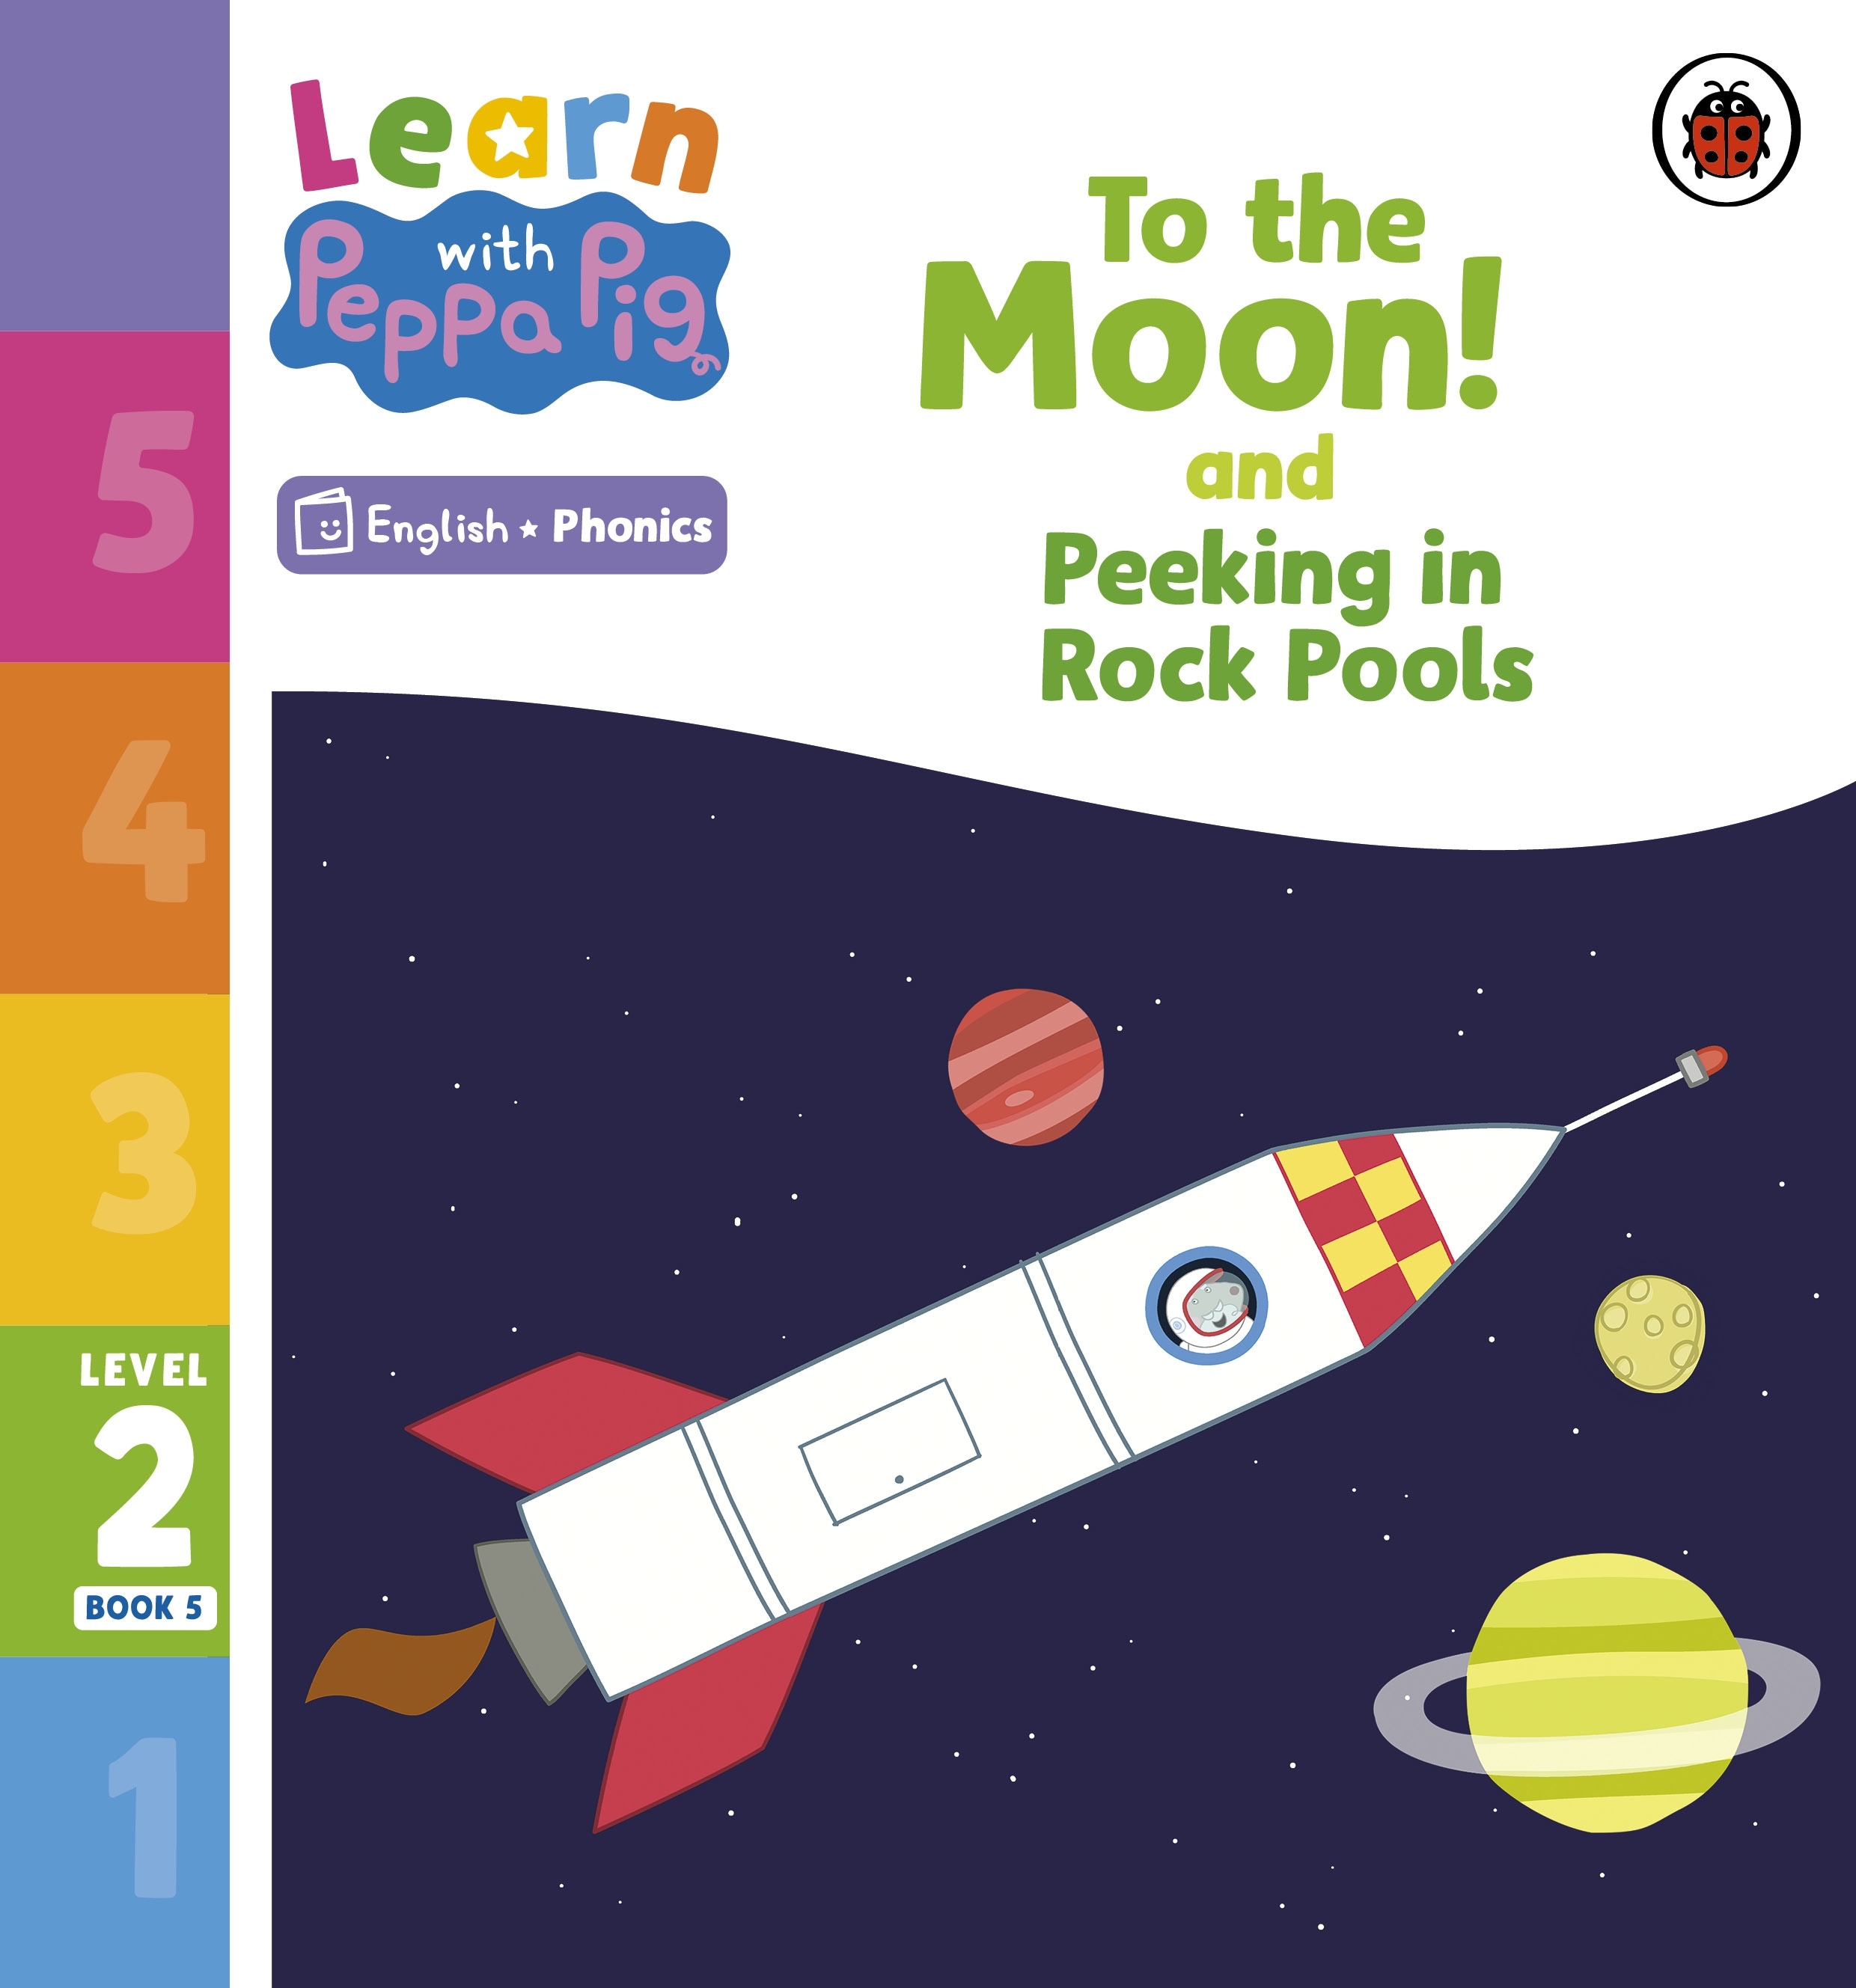 Learn with Peppa Phonics Level 2 Book 5 — To the Moon! and Peeking in Rock Pools (Phonics Reader)